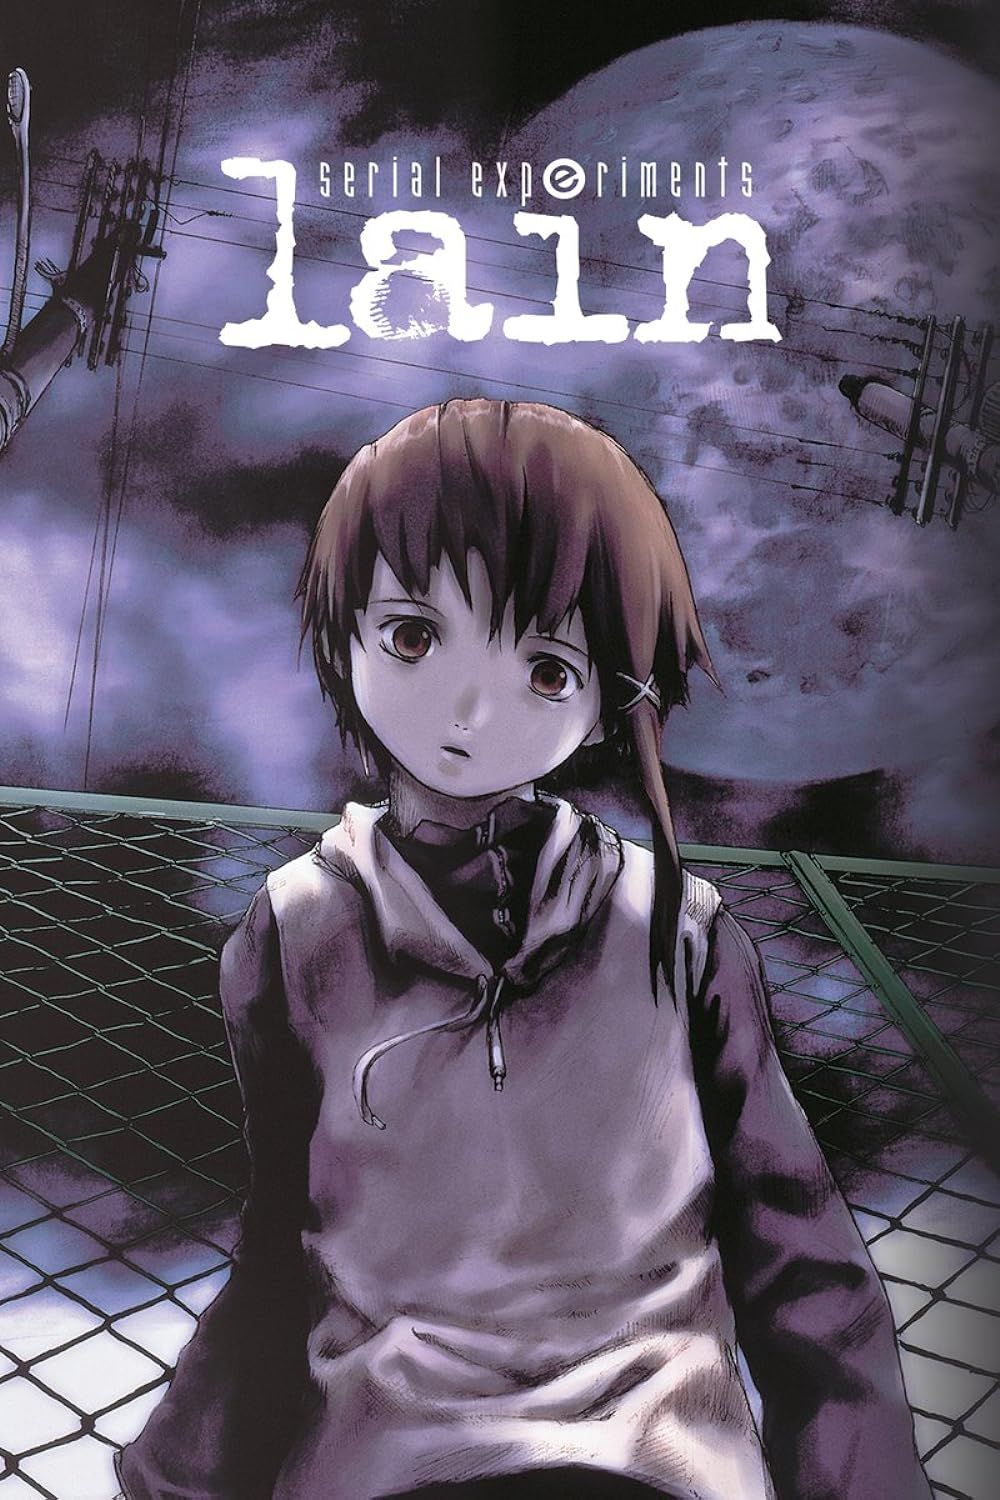 Poster of Serial Experiments Lain with the titular character looking at the reader